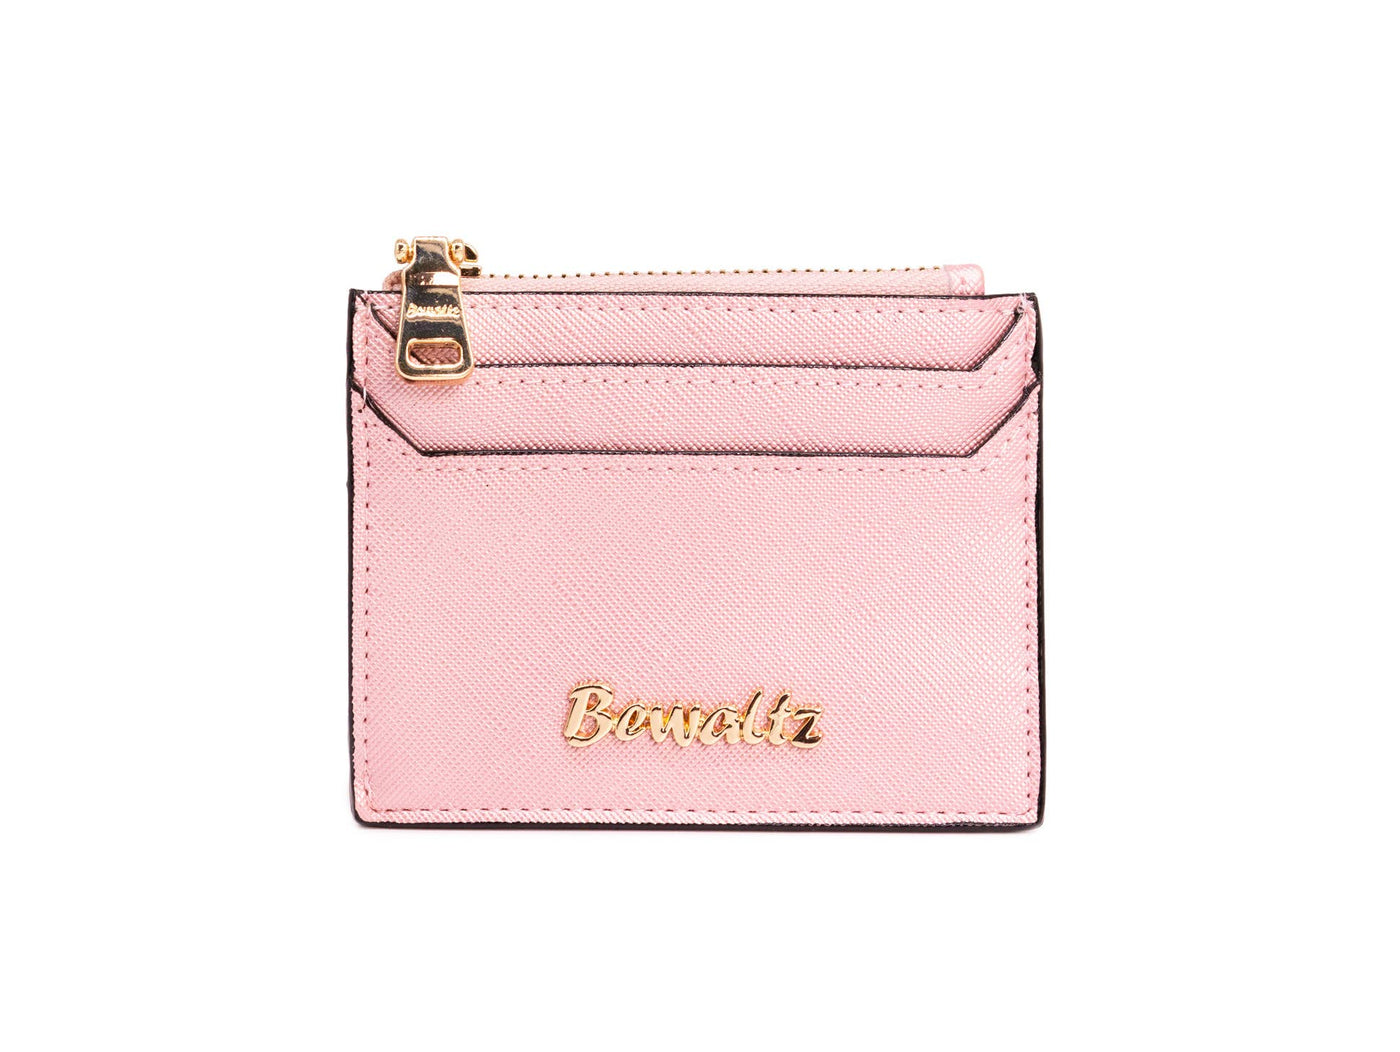 Pastel Keychain Card Holder- Click to Pick Your Color!